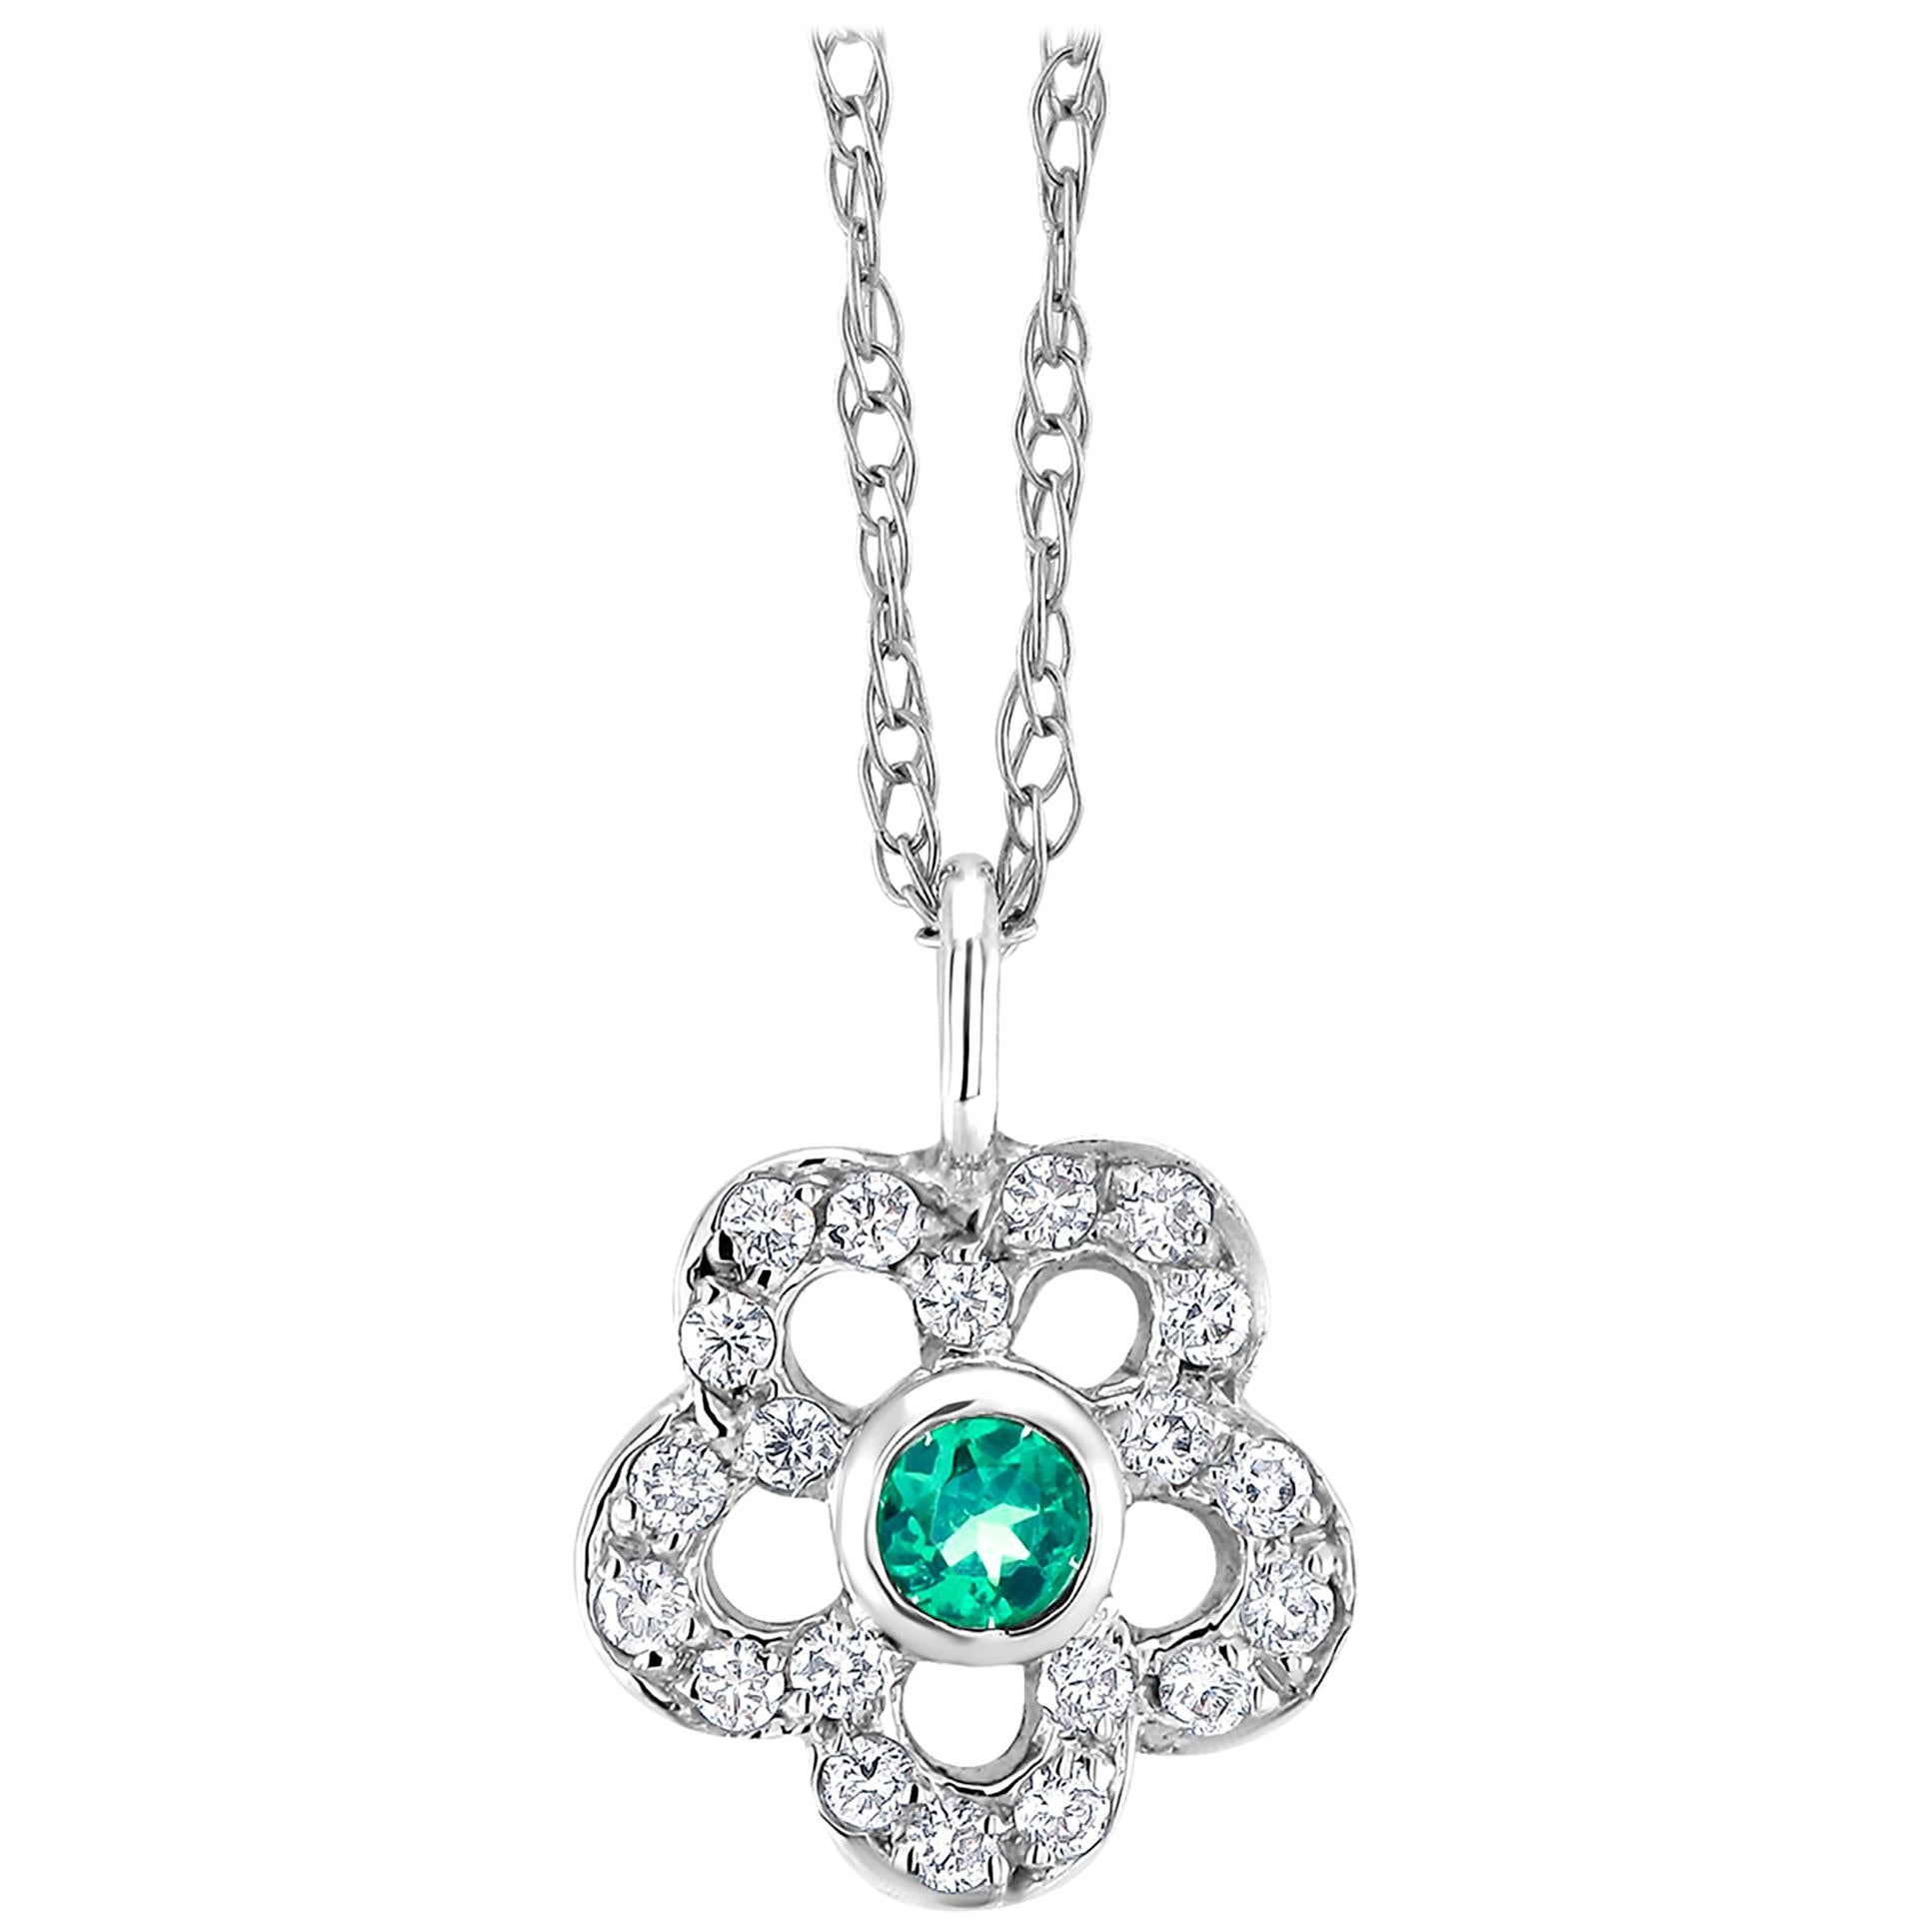 Emerald and Diamond Floral Charm Pendant Necklace